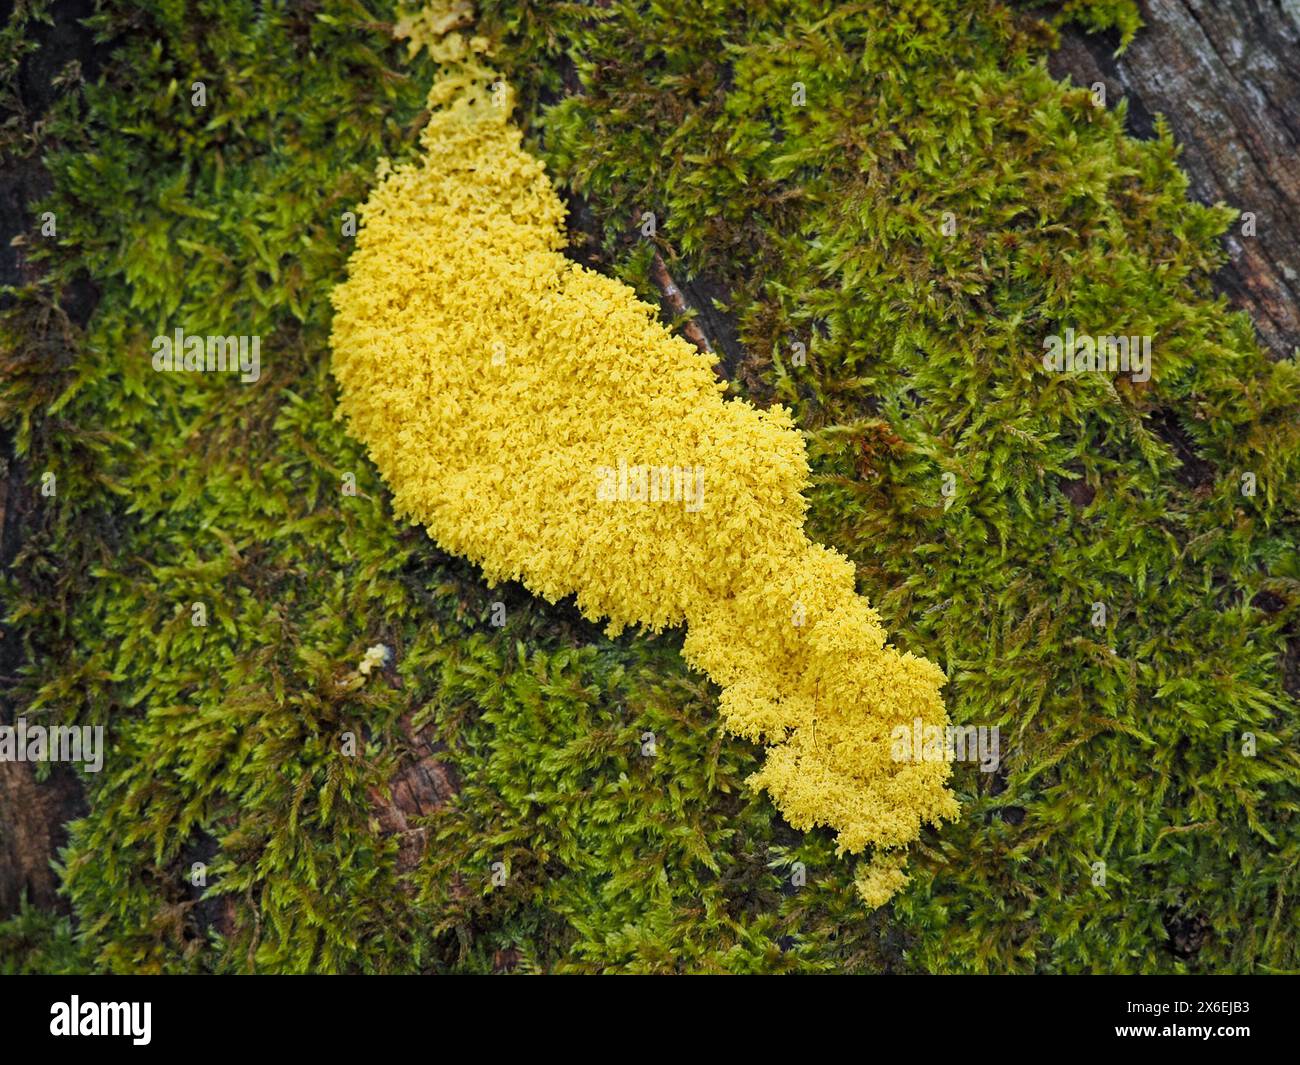 Yellow Slime Mould or Dog vomit slime mould (Fuligo septica) feeding stage of an Amoebozoa plasmodium that recycles plant debris, on mossy fallen wood Stock Photo